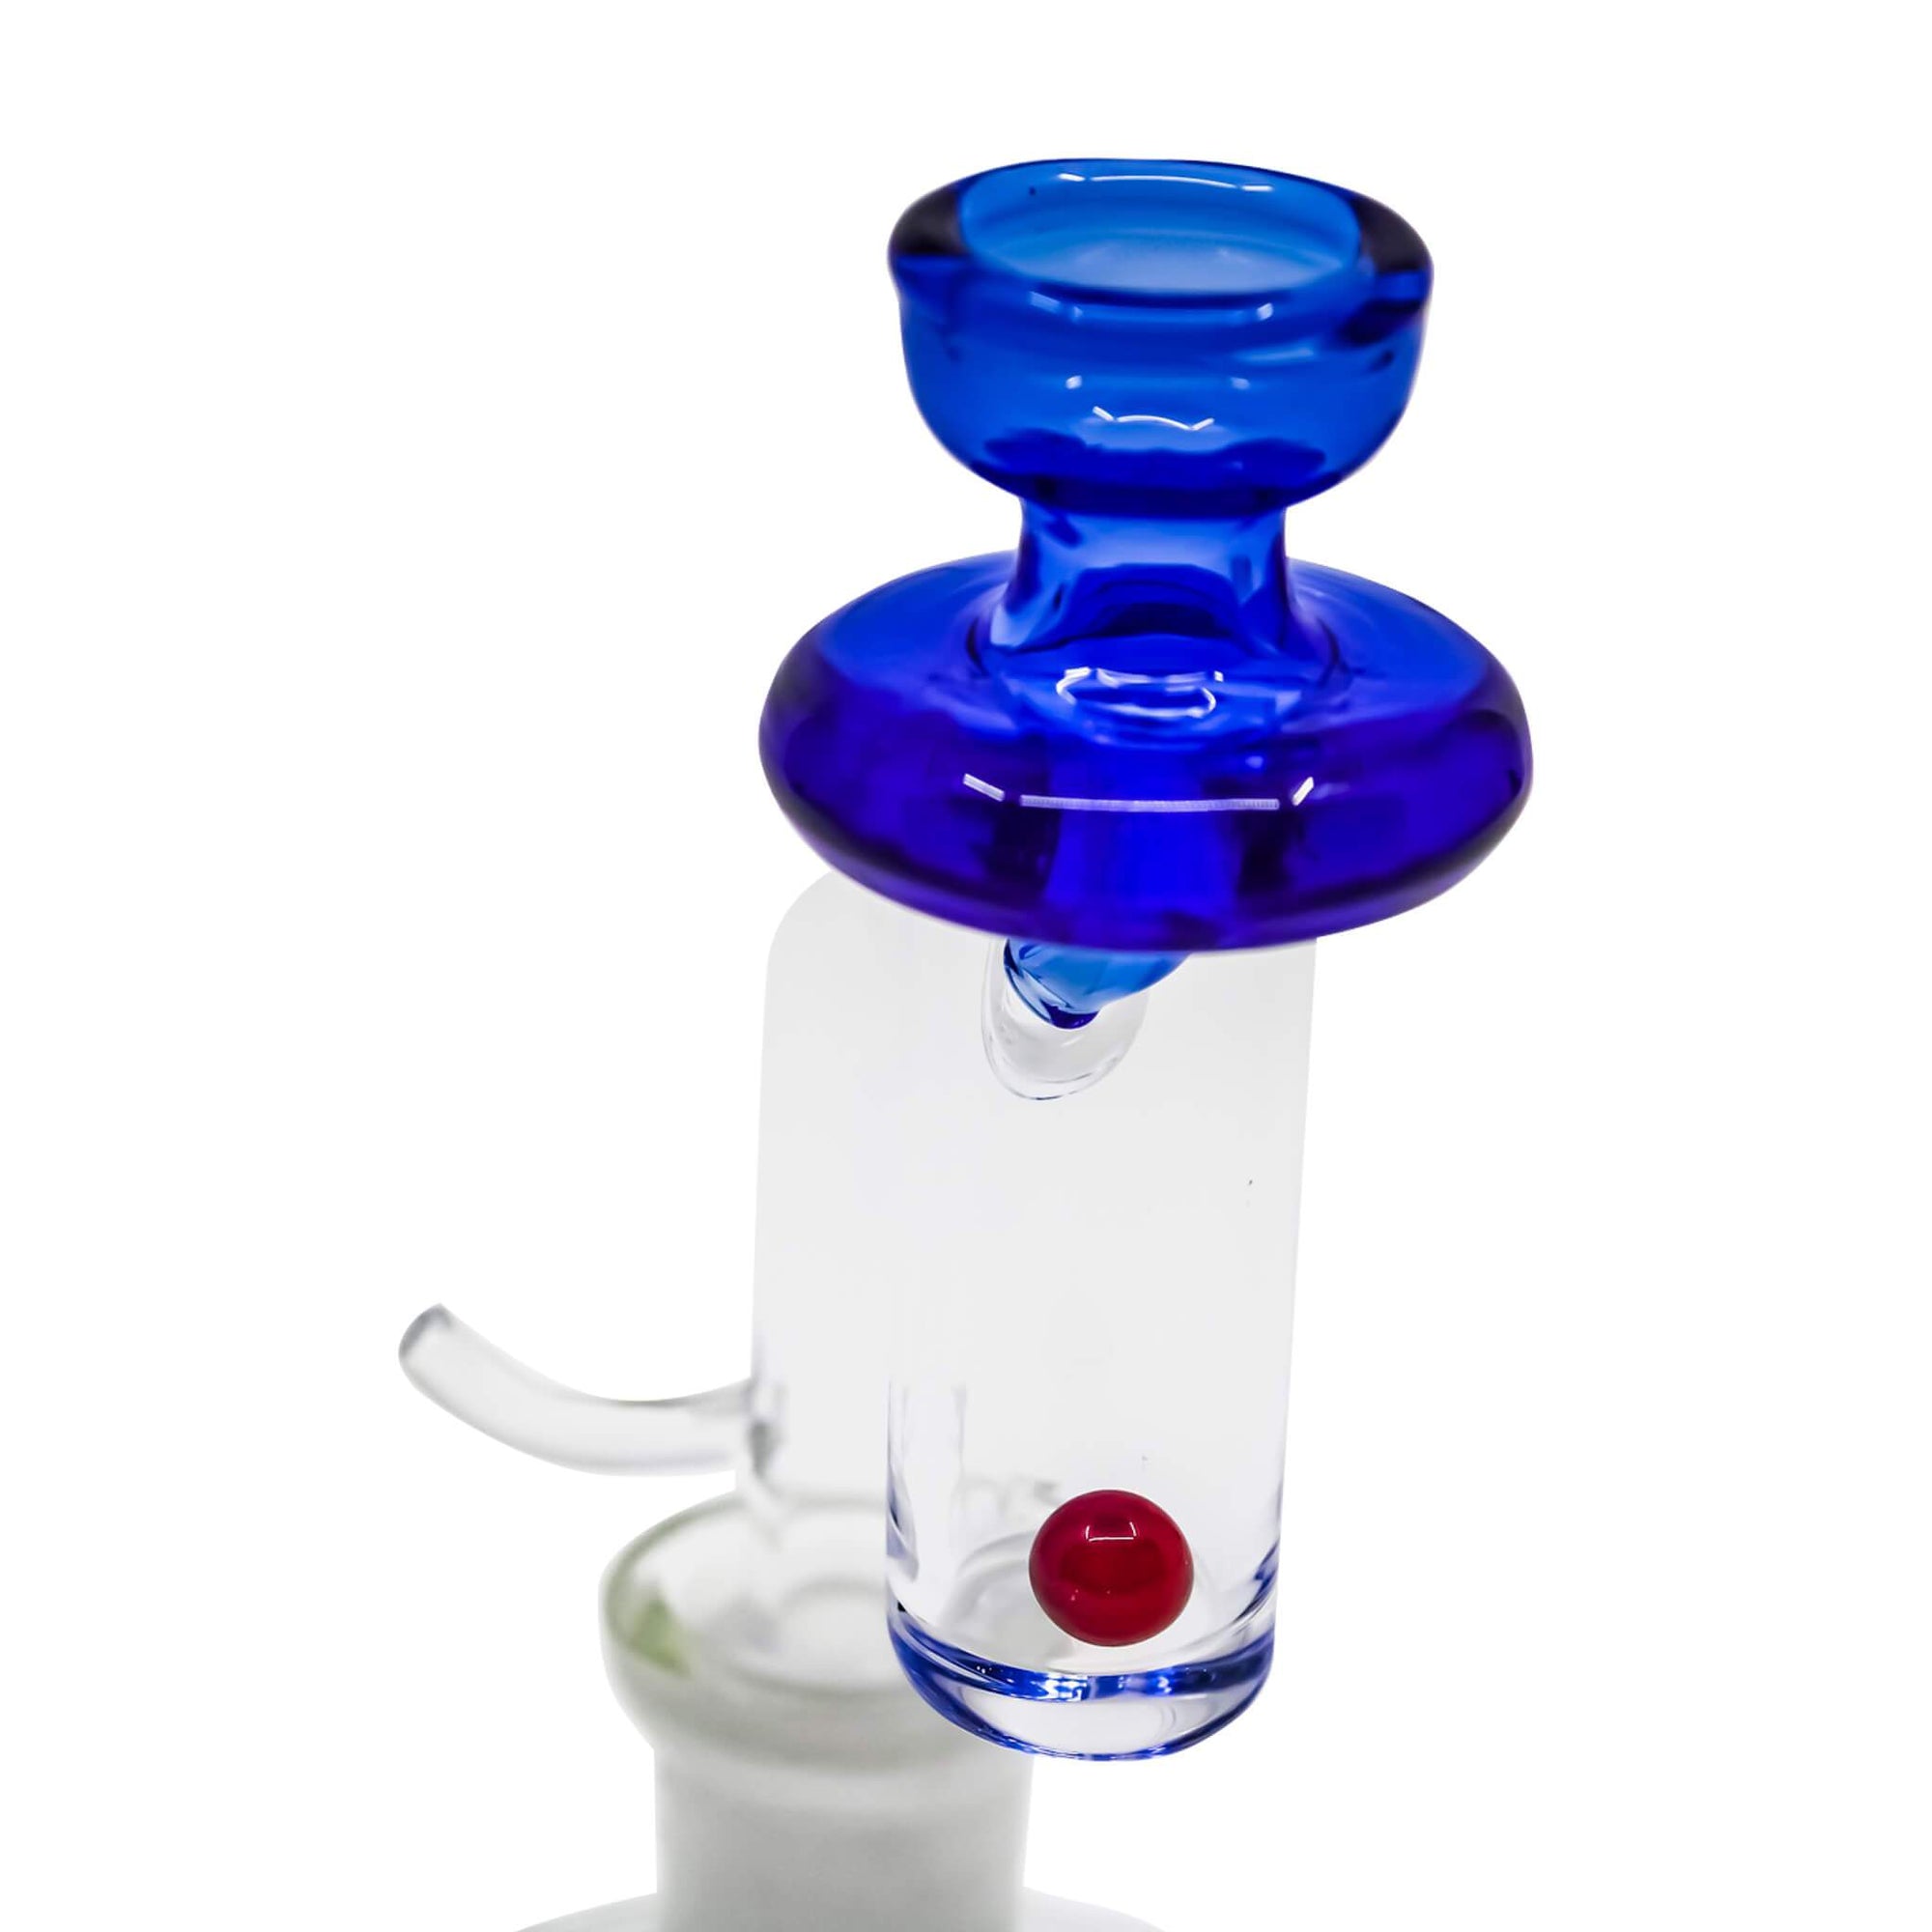 E-Banger Spinner Carb Cap | Blue Close Up View | the dabbing specialists